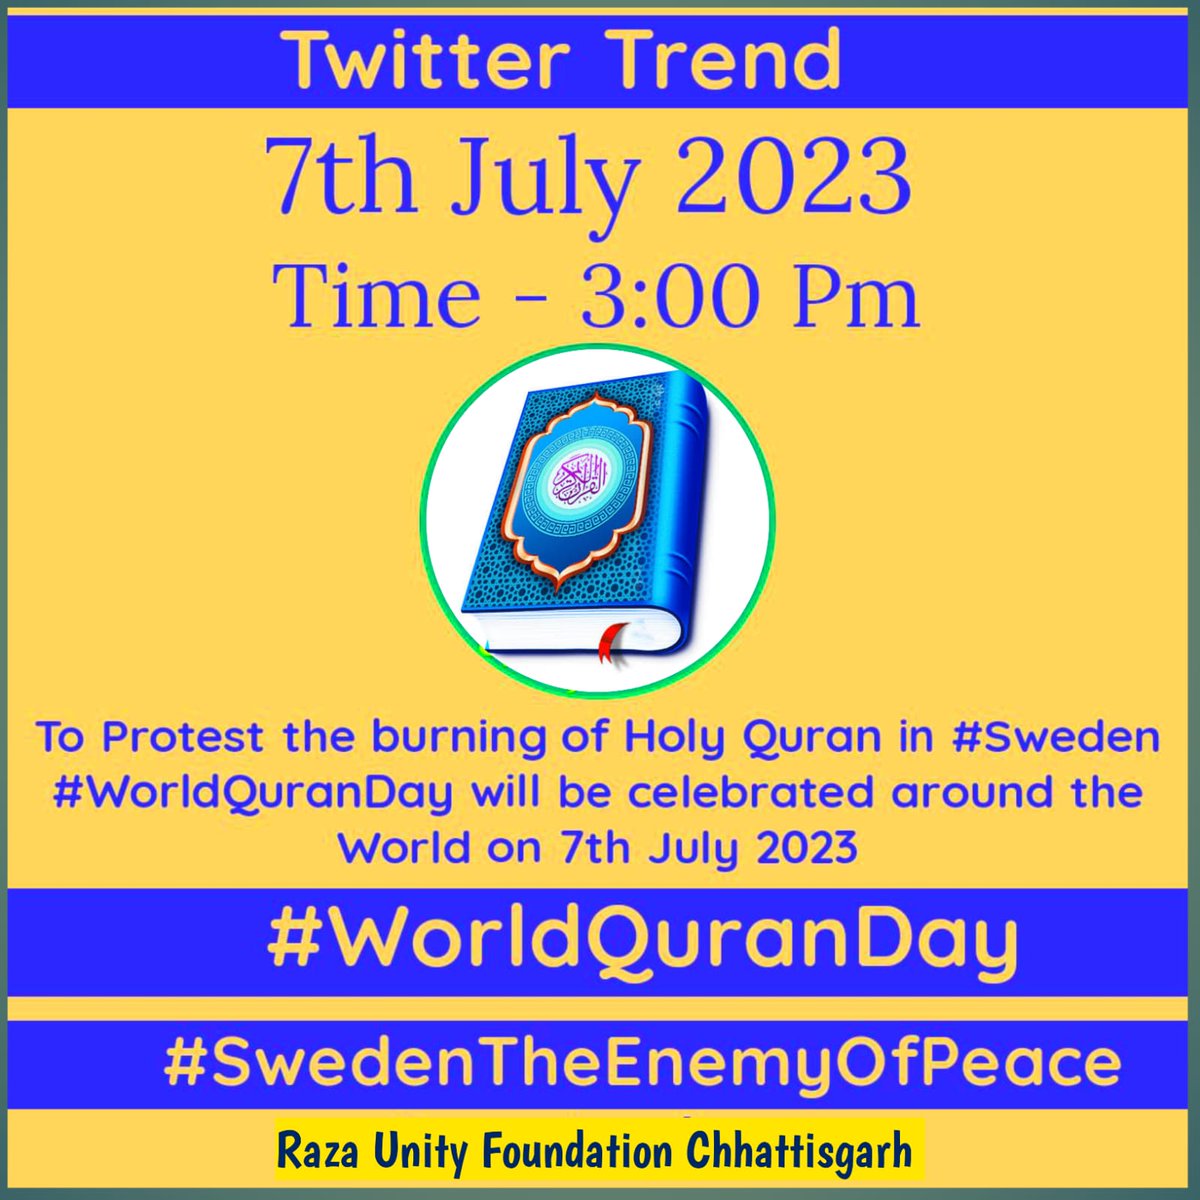 To Protest the burning of Holy Quran in #Sweden #WorldQuranDay will be celebrated around the World on 7th July 2023 - #RazaAcademy 

Tweet with the hashtag given below
Date  - 7th July 2023
Time - 3:00 pm
#WorldQuranDay
#SwedenTheEnemyOfPeace